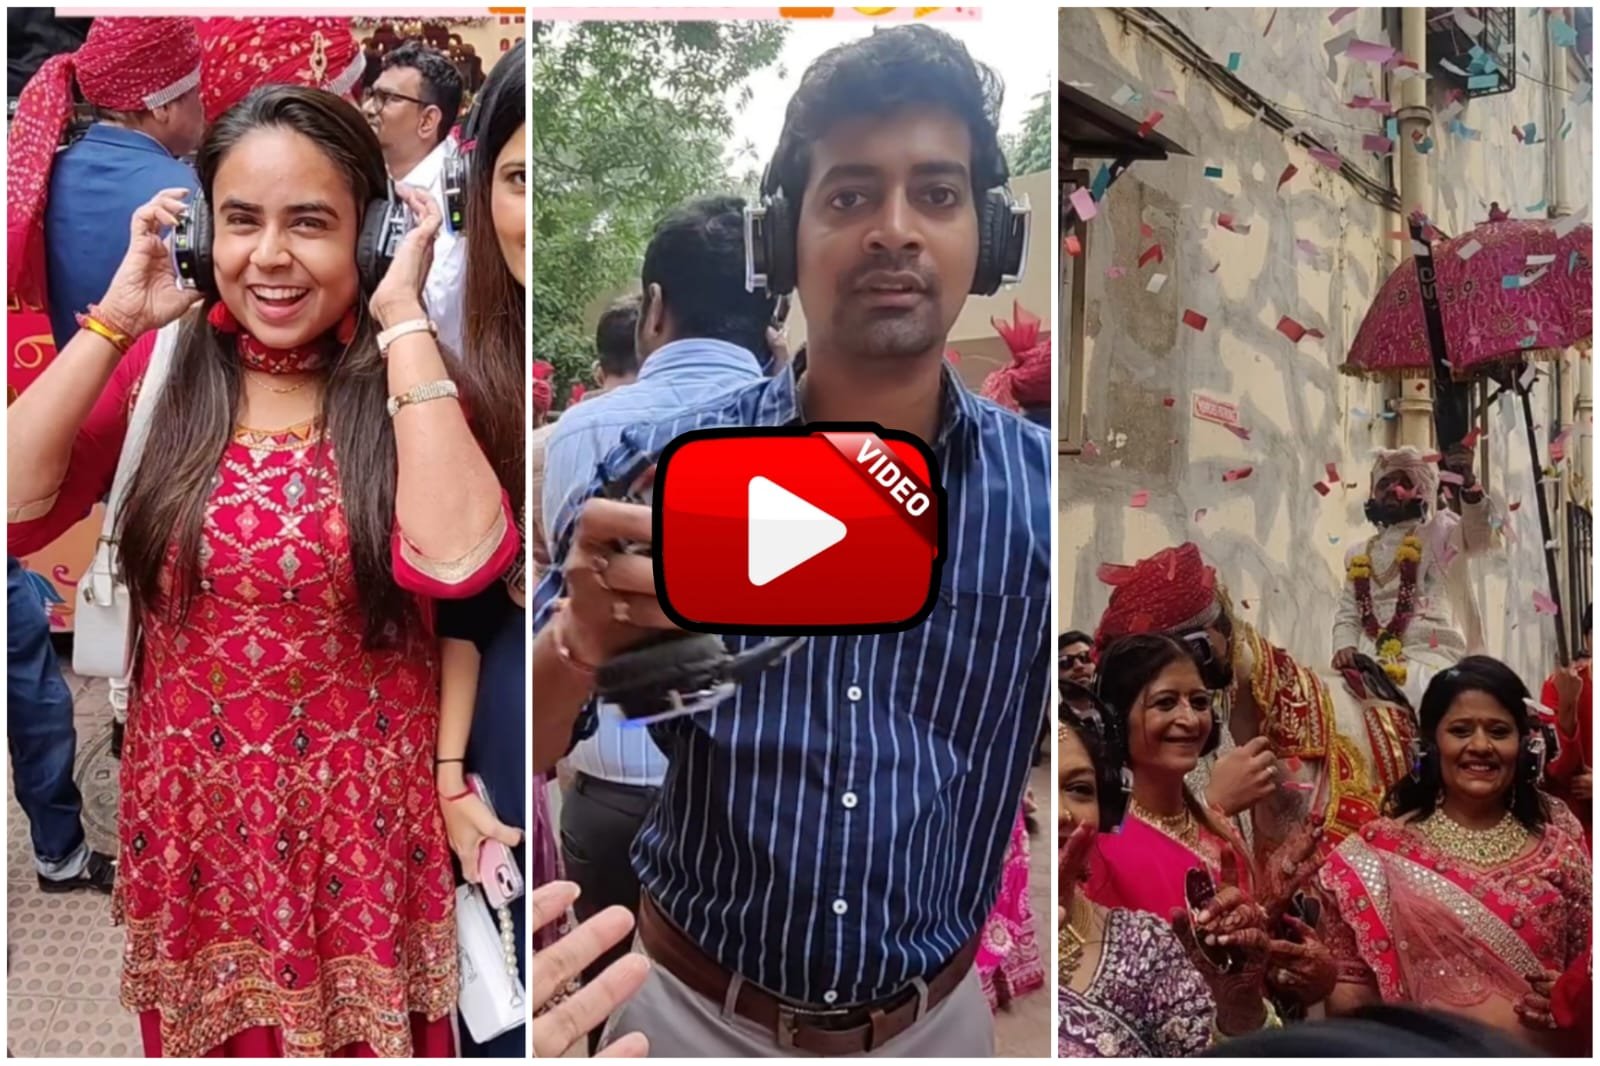 Baraat Ka Video - Have you ever seen such a wedding procession which took place in a very calm manner?